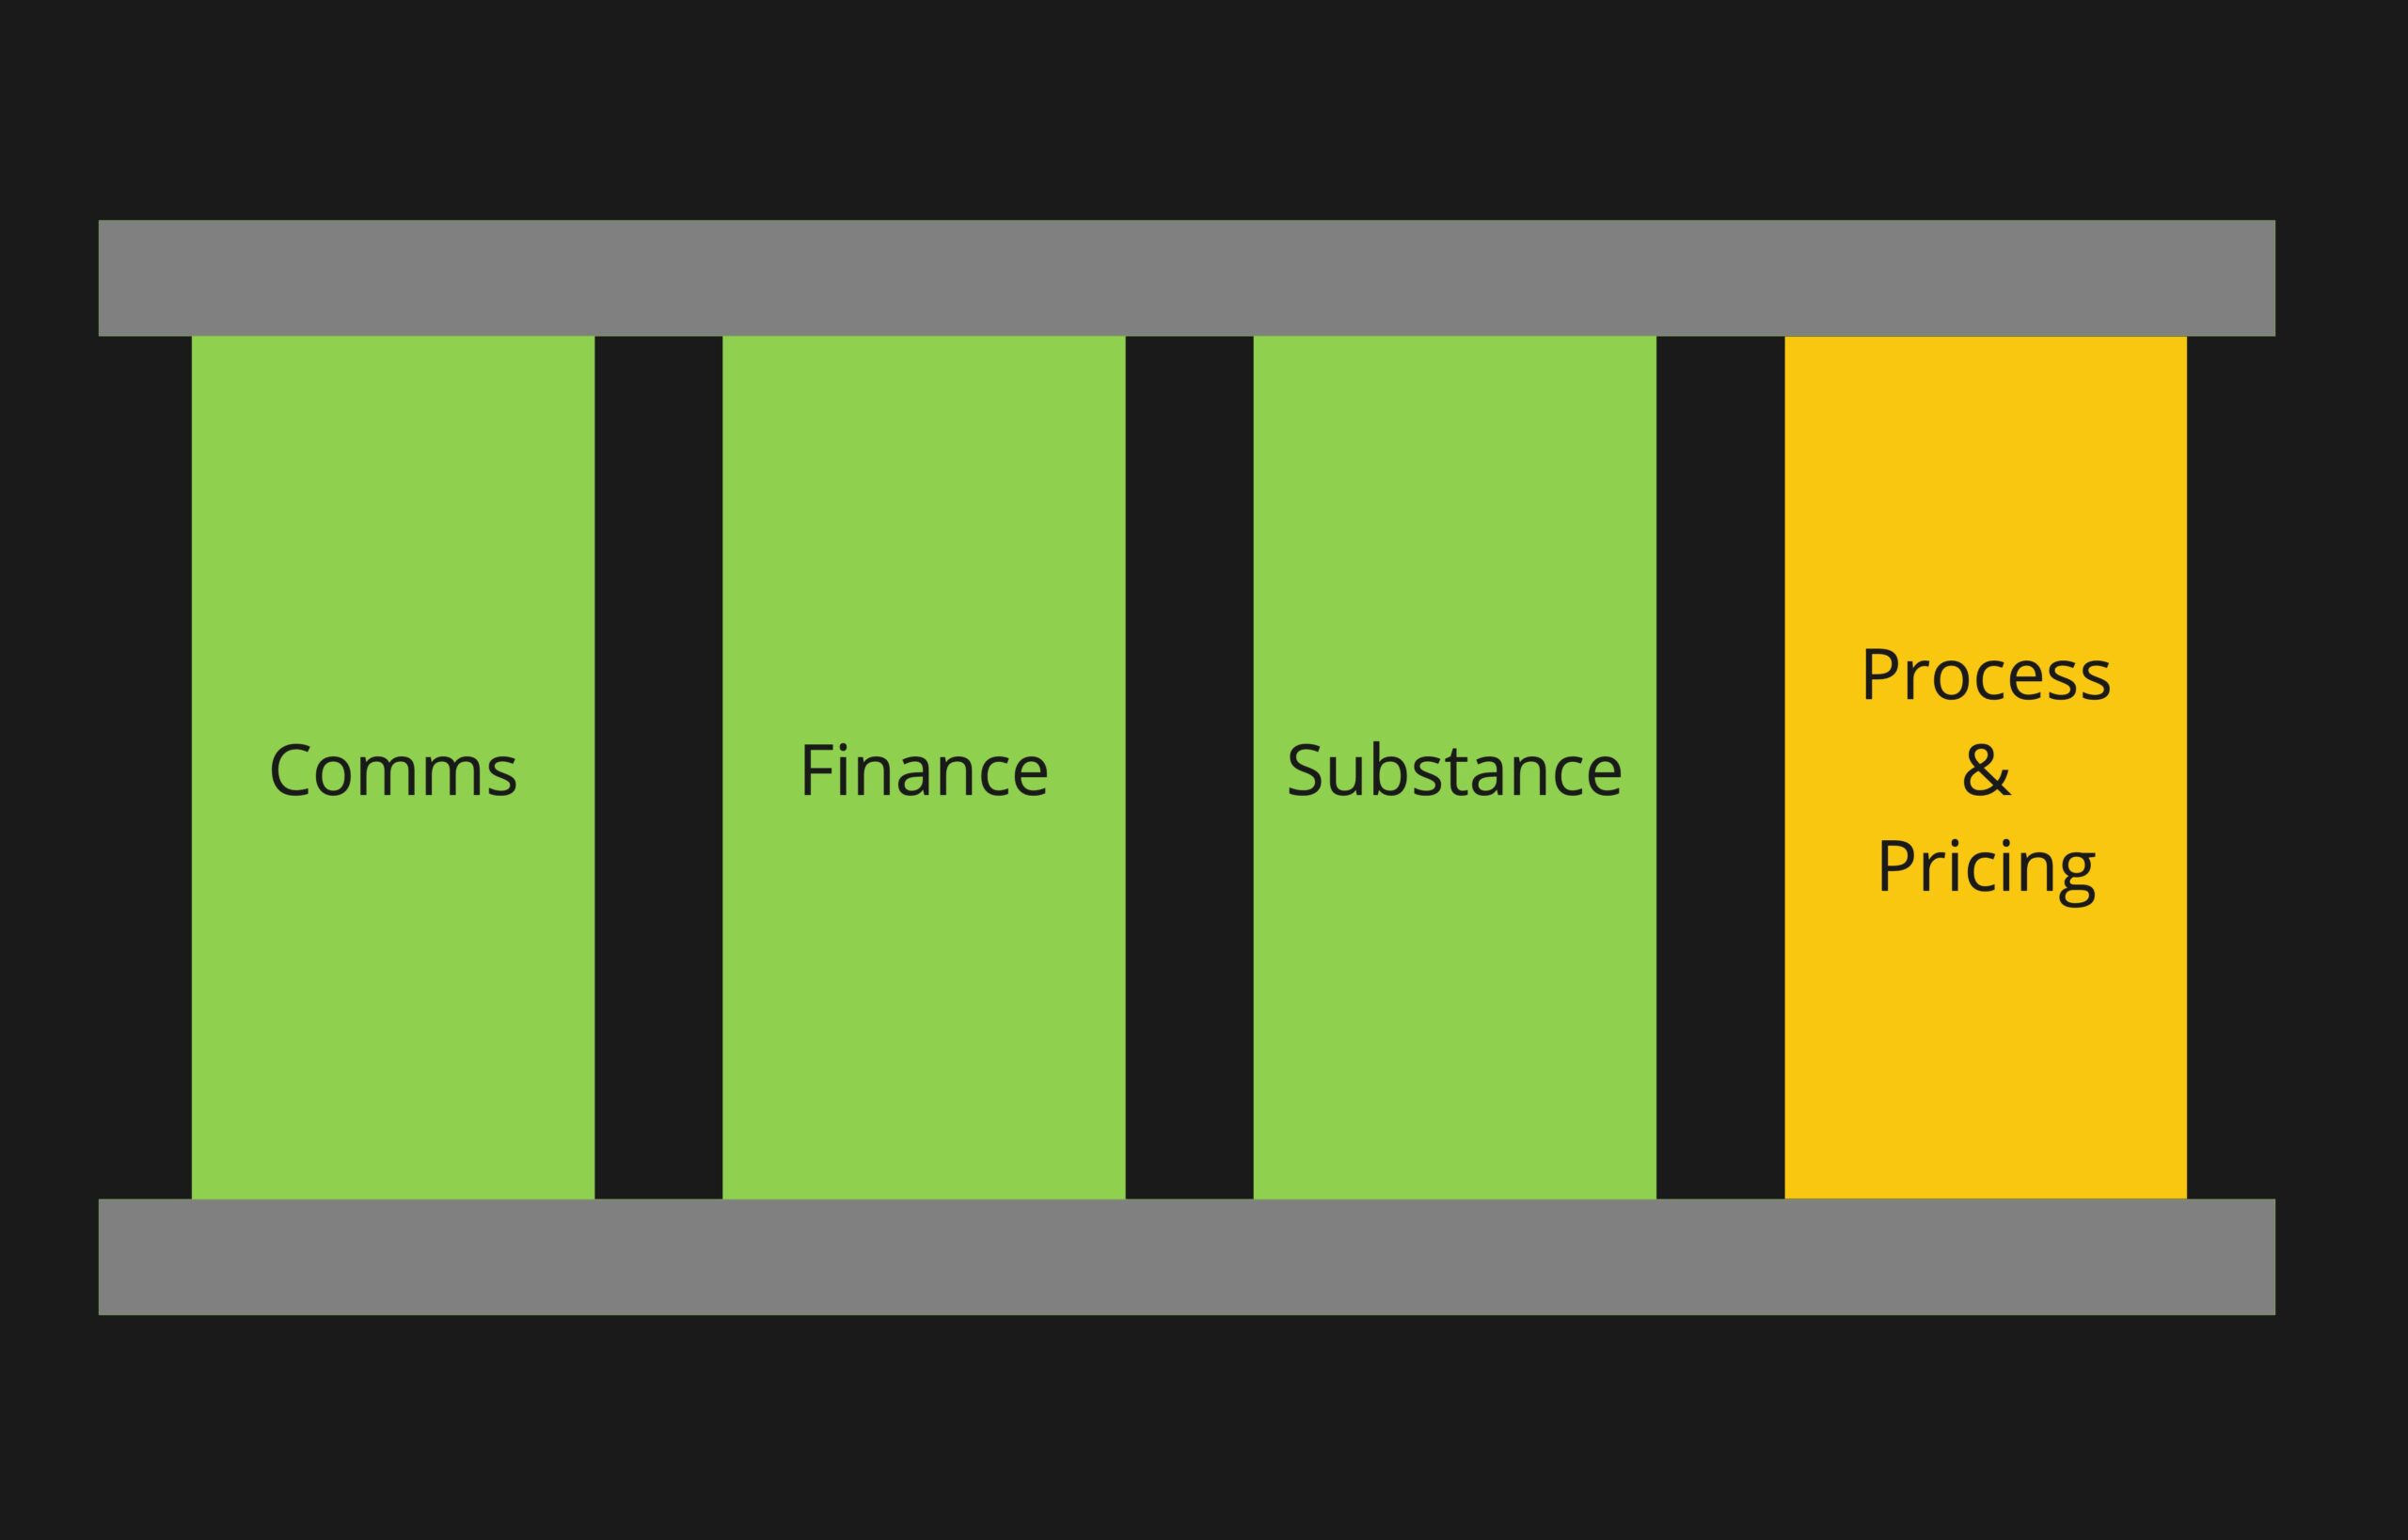 A fourth pillar for legal work: process and pricing